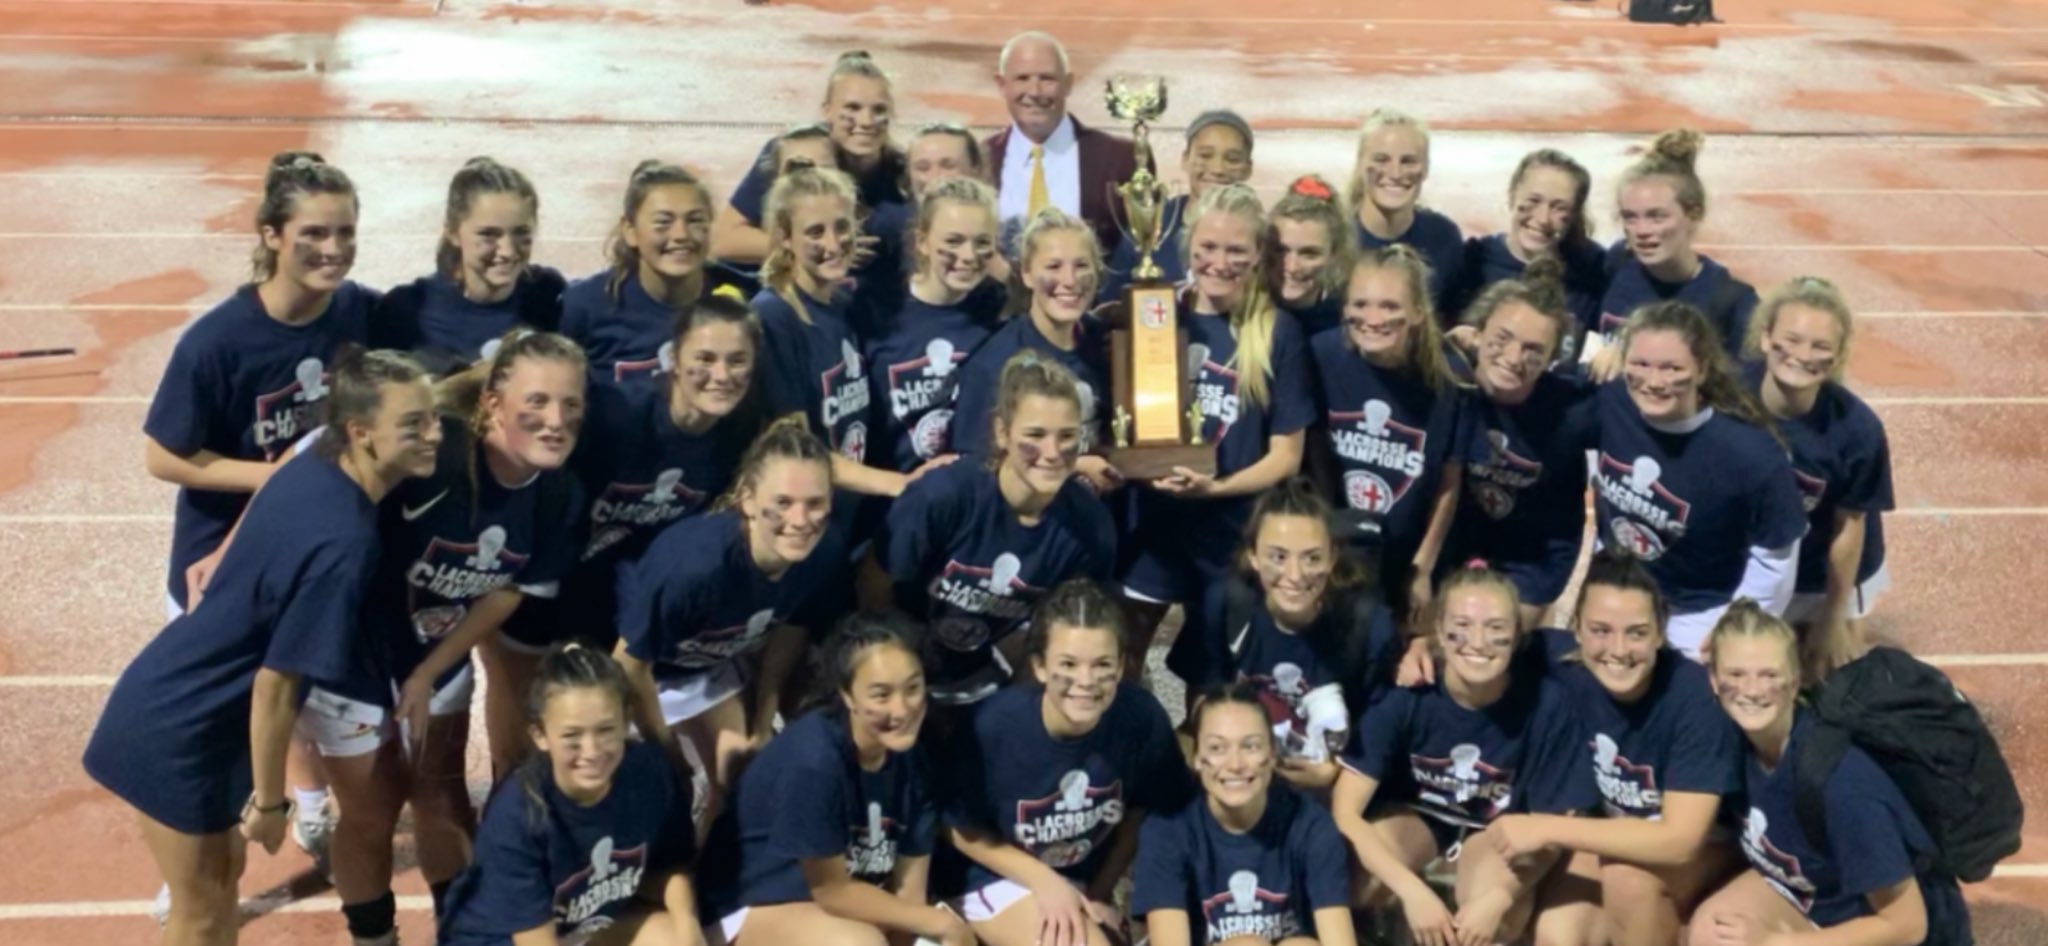 Bishop Ireton shows some skill to beat Good Counsel for fourth straight WCAC girls’ lacrosse title